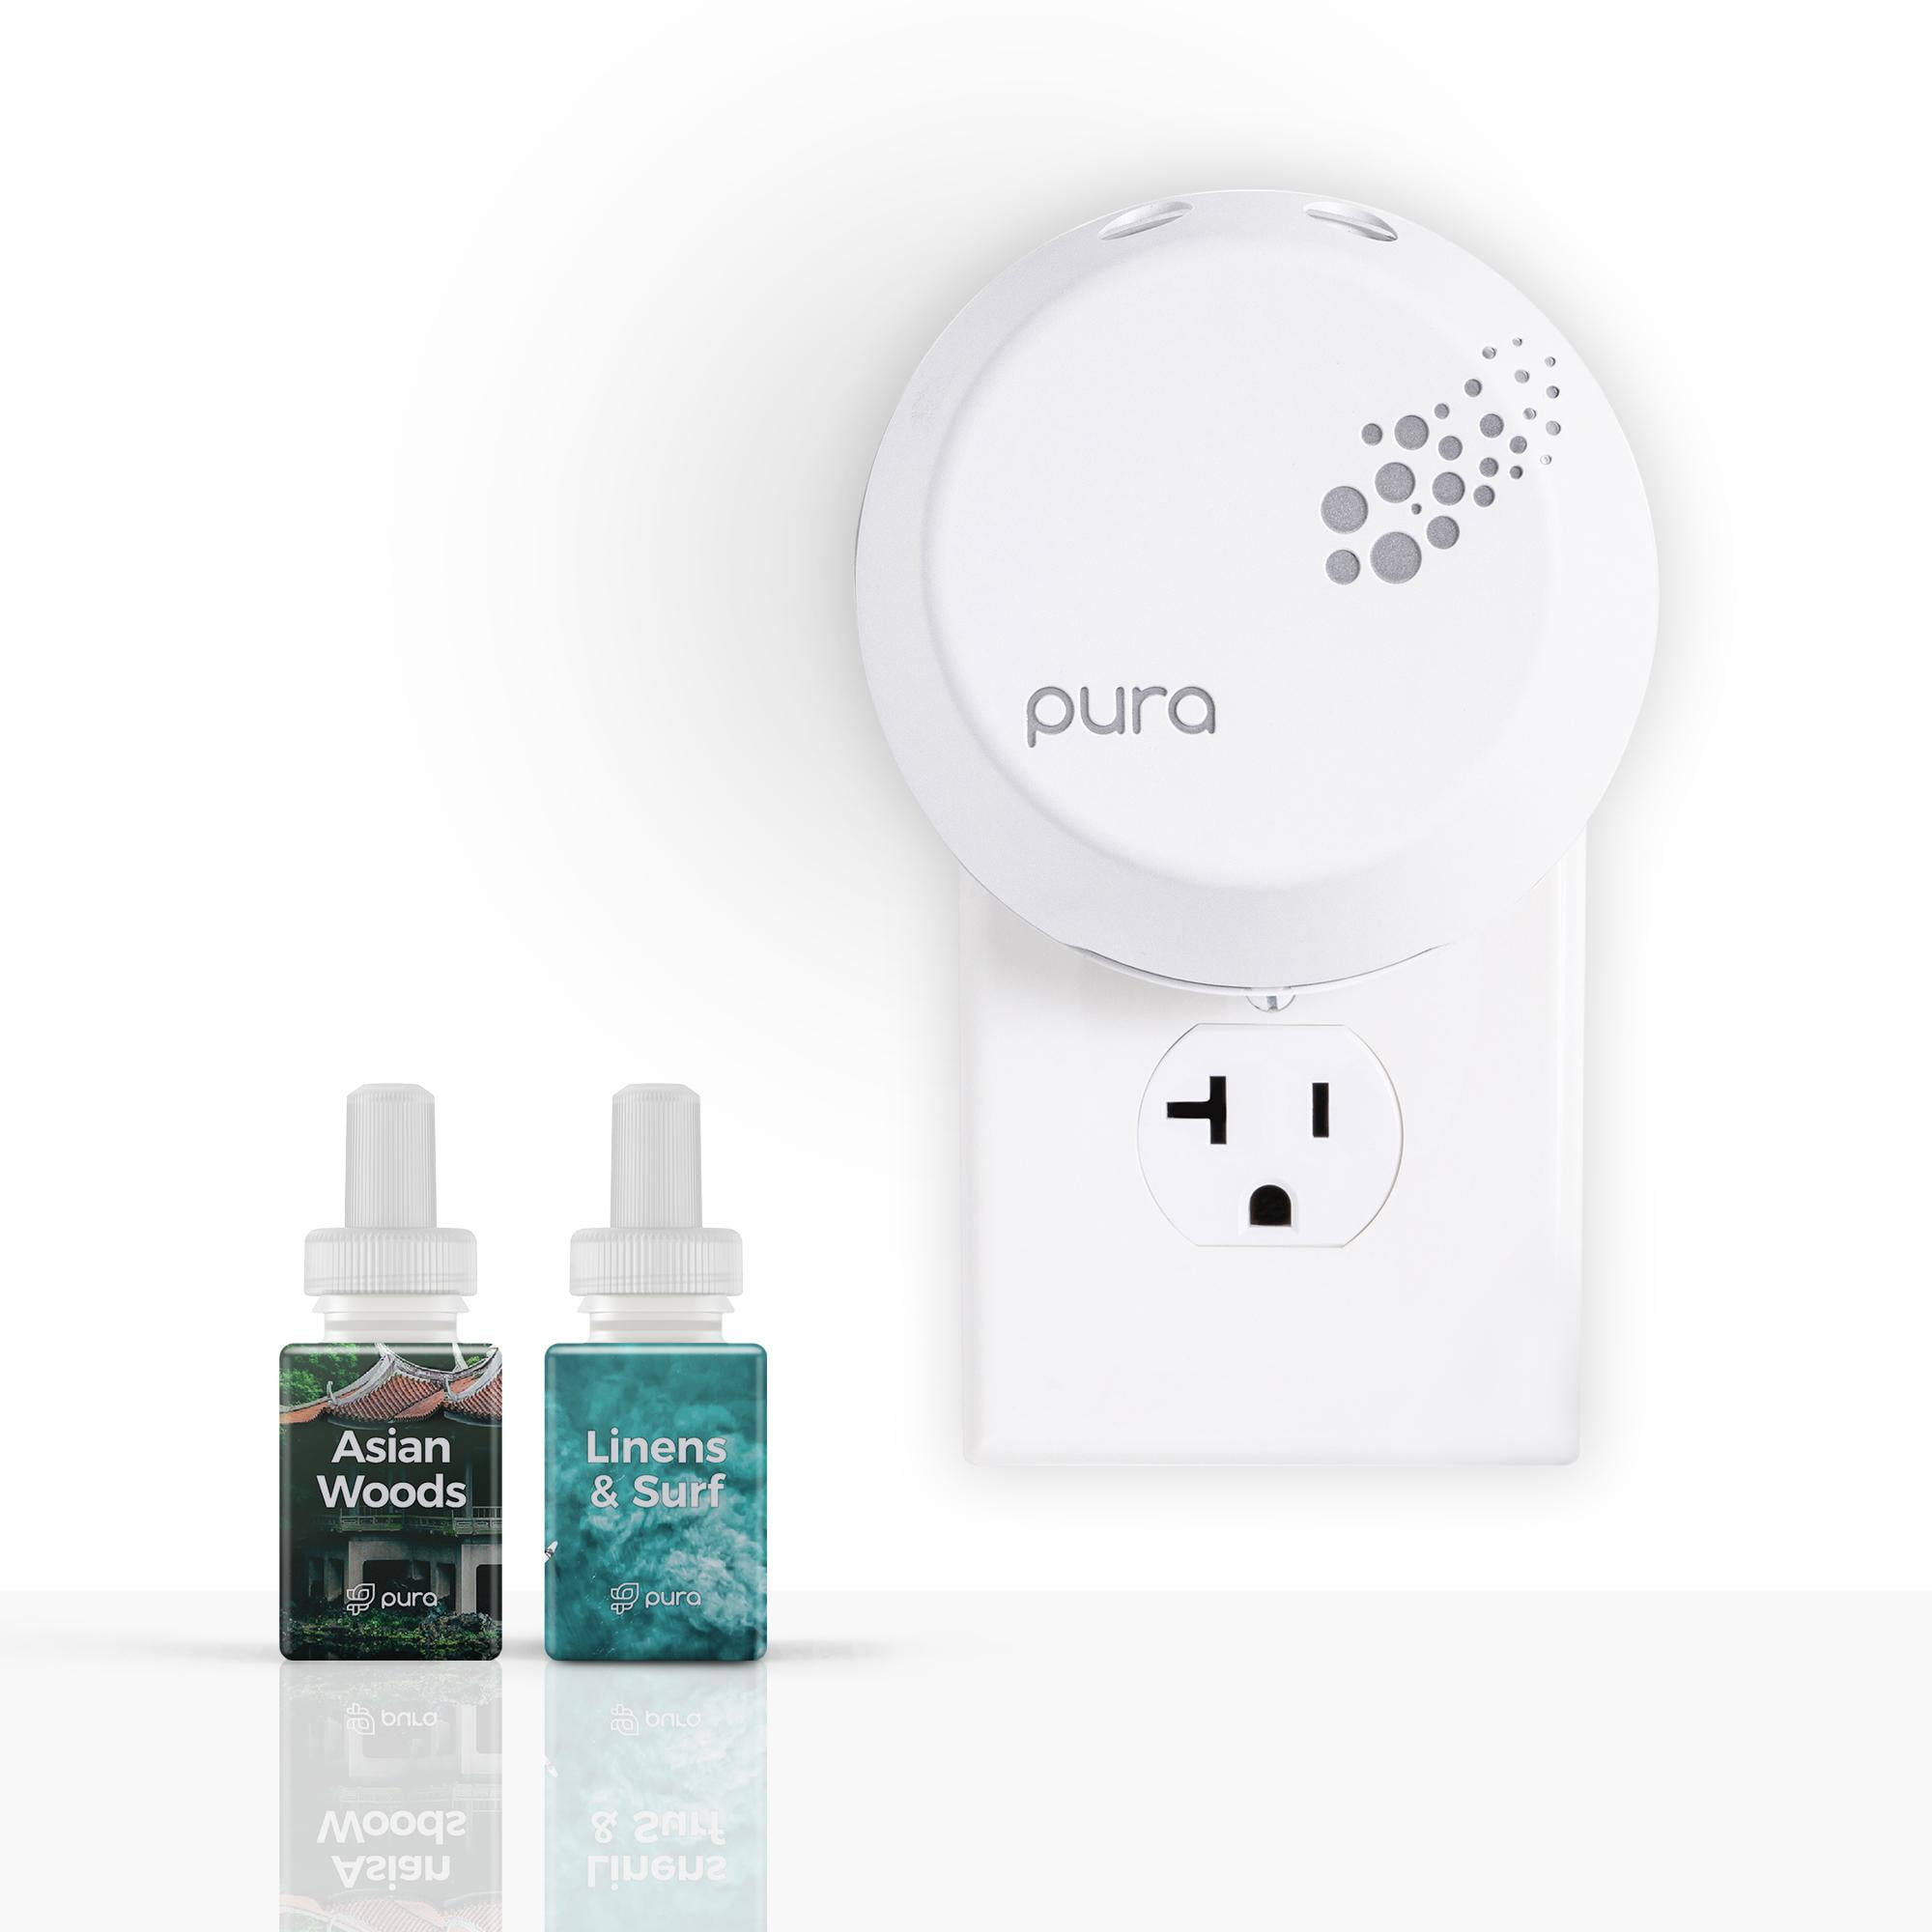 Pura Smart Home Fragrance Device Starter Kit, Asian Woods & Spice with Linens & Surf